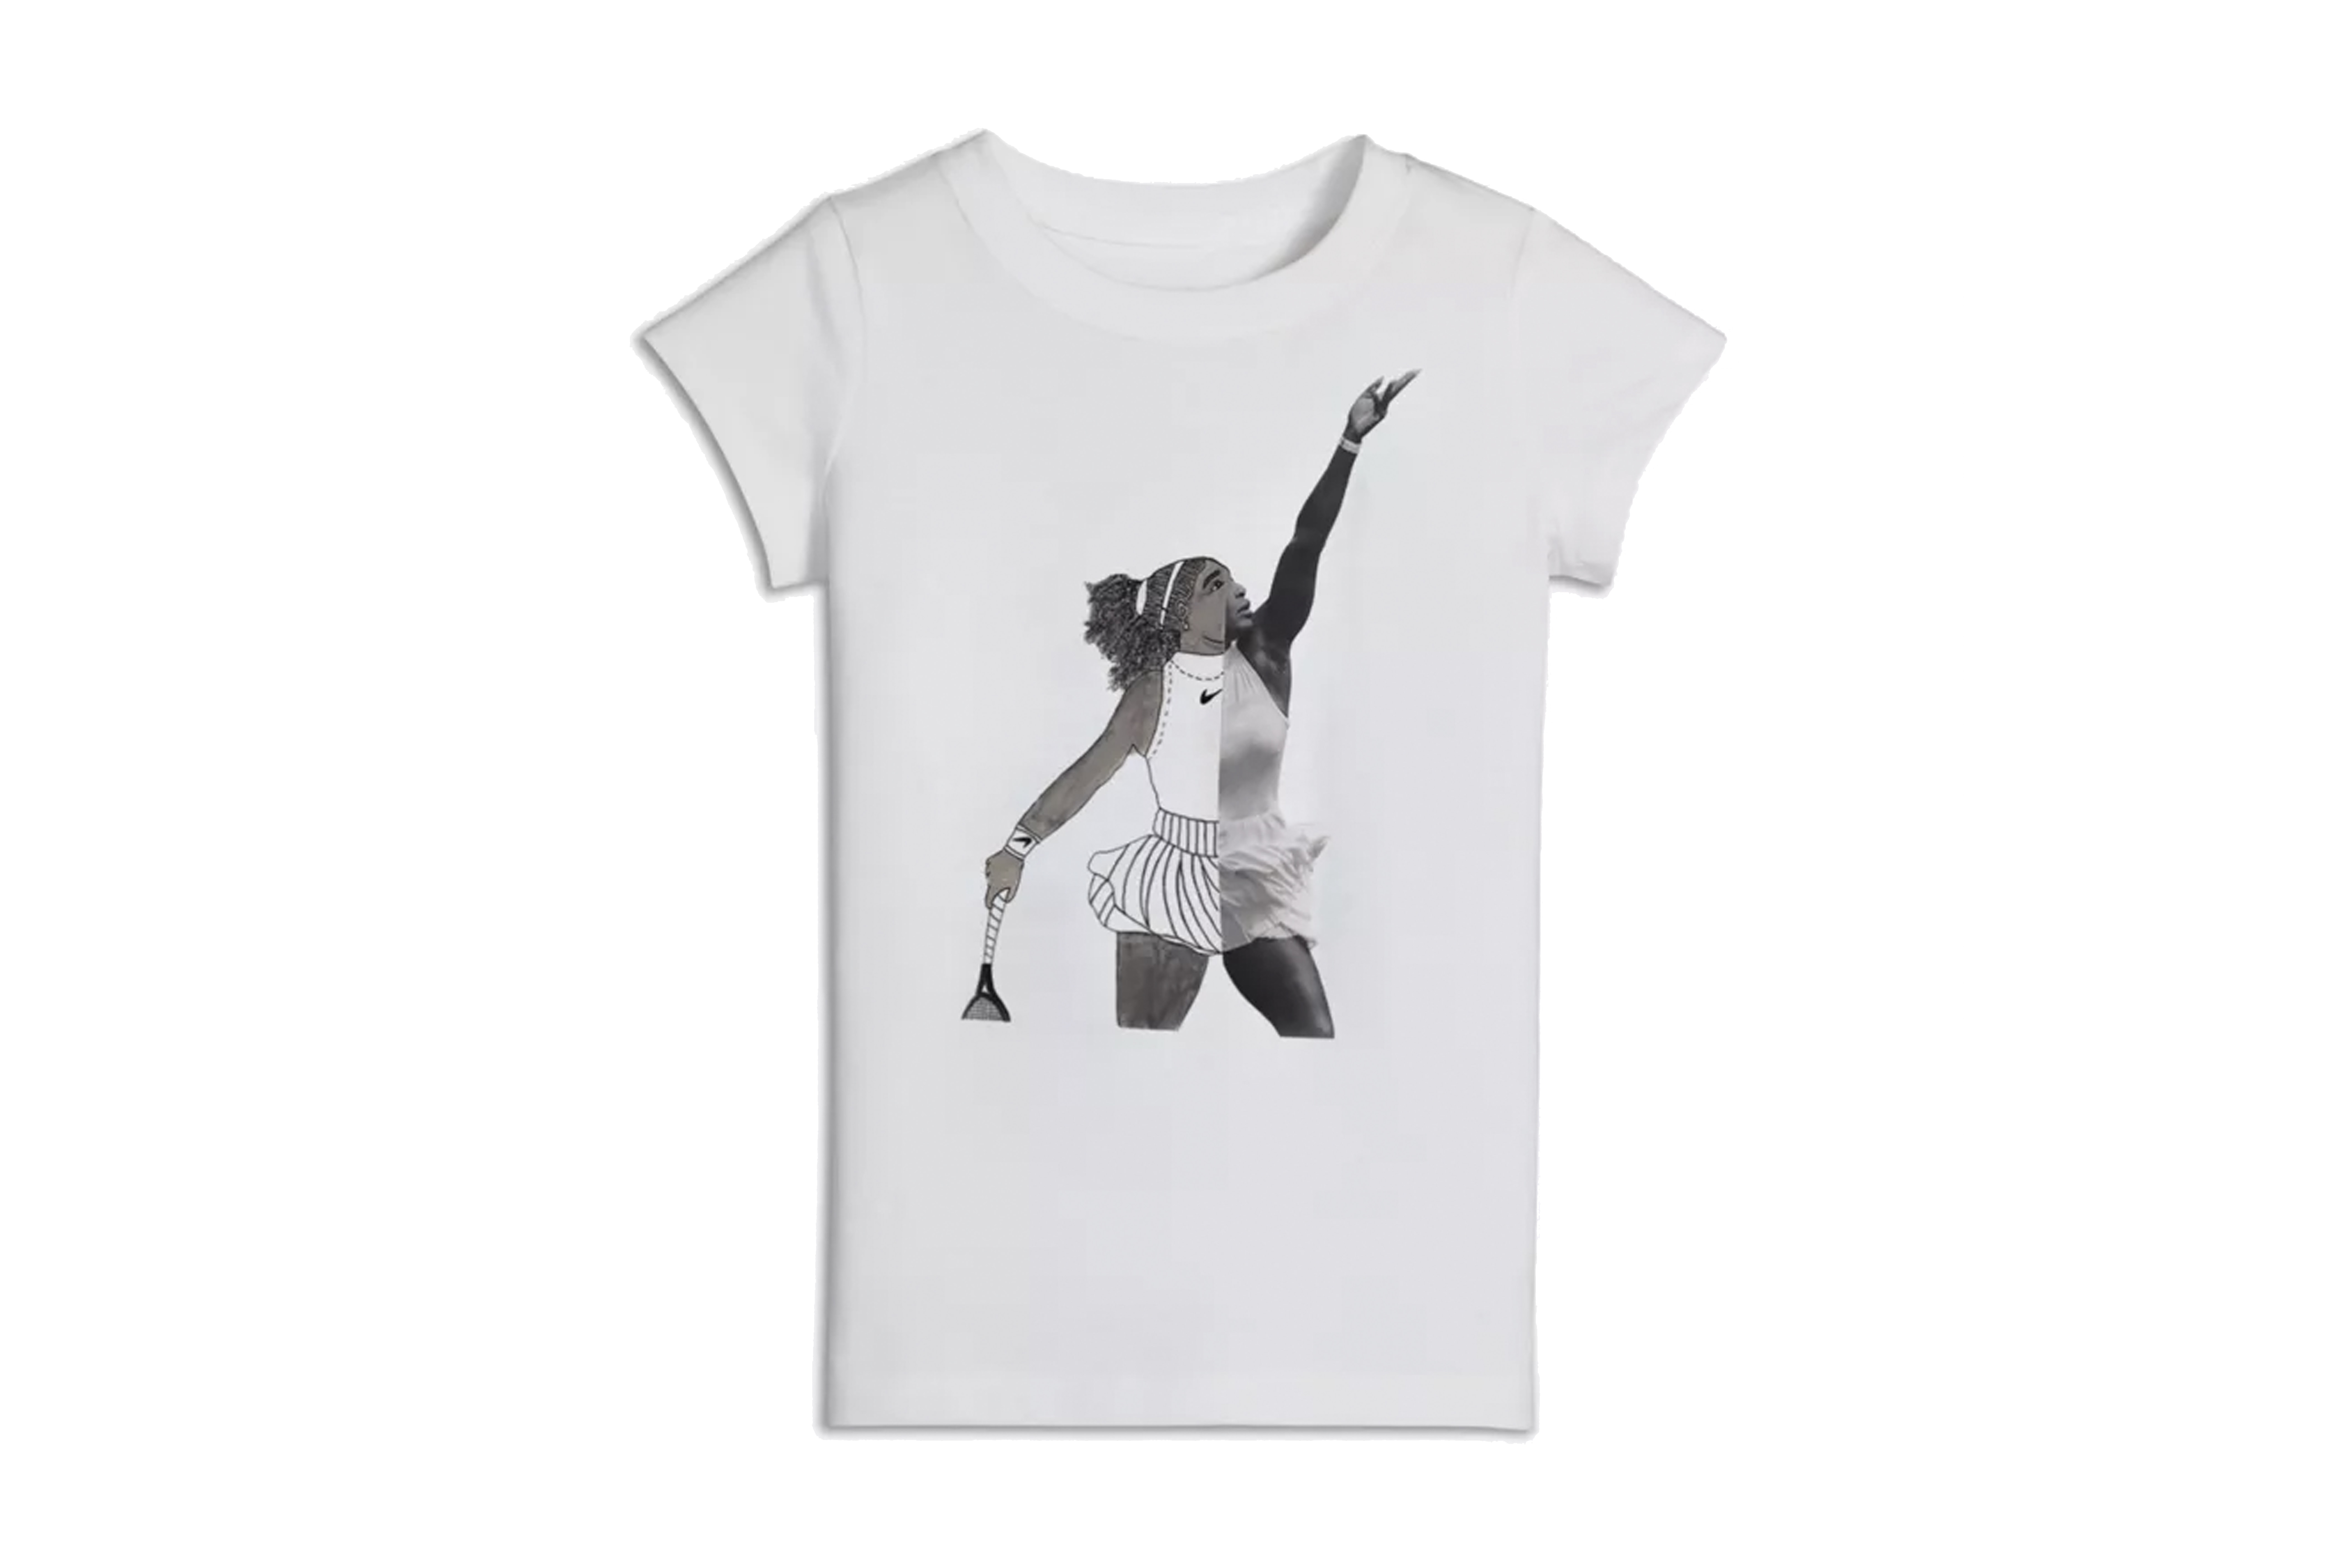 Dear Giana Nike Serena Williams Collaboration Collection International Day of the Girl T-Shirt Release Drawing Artist